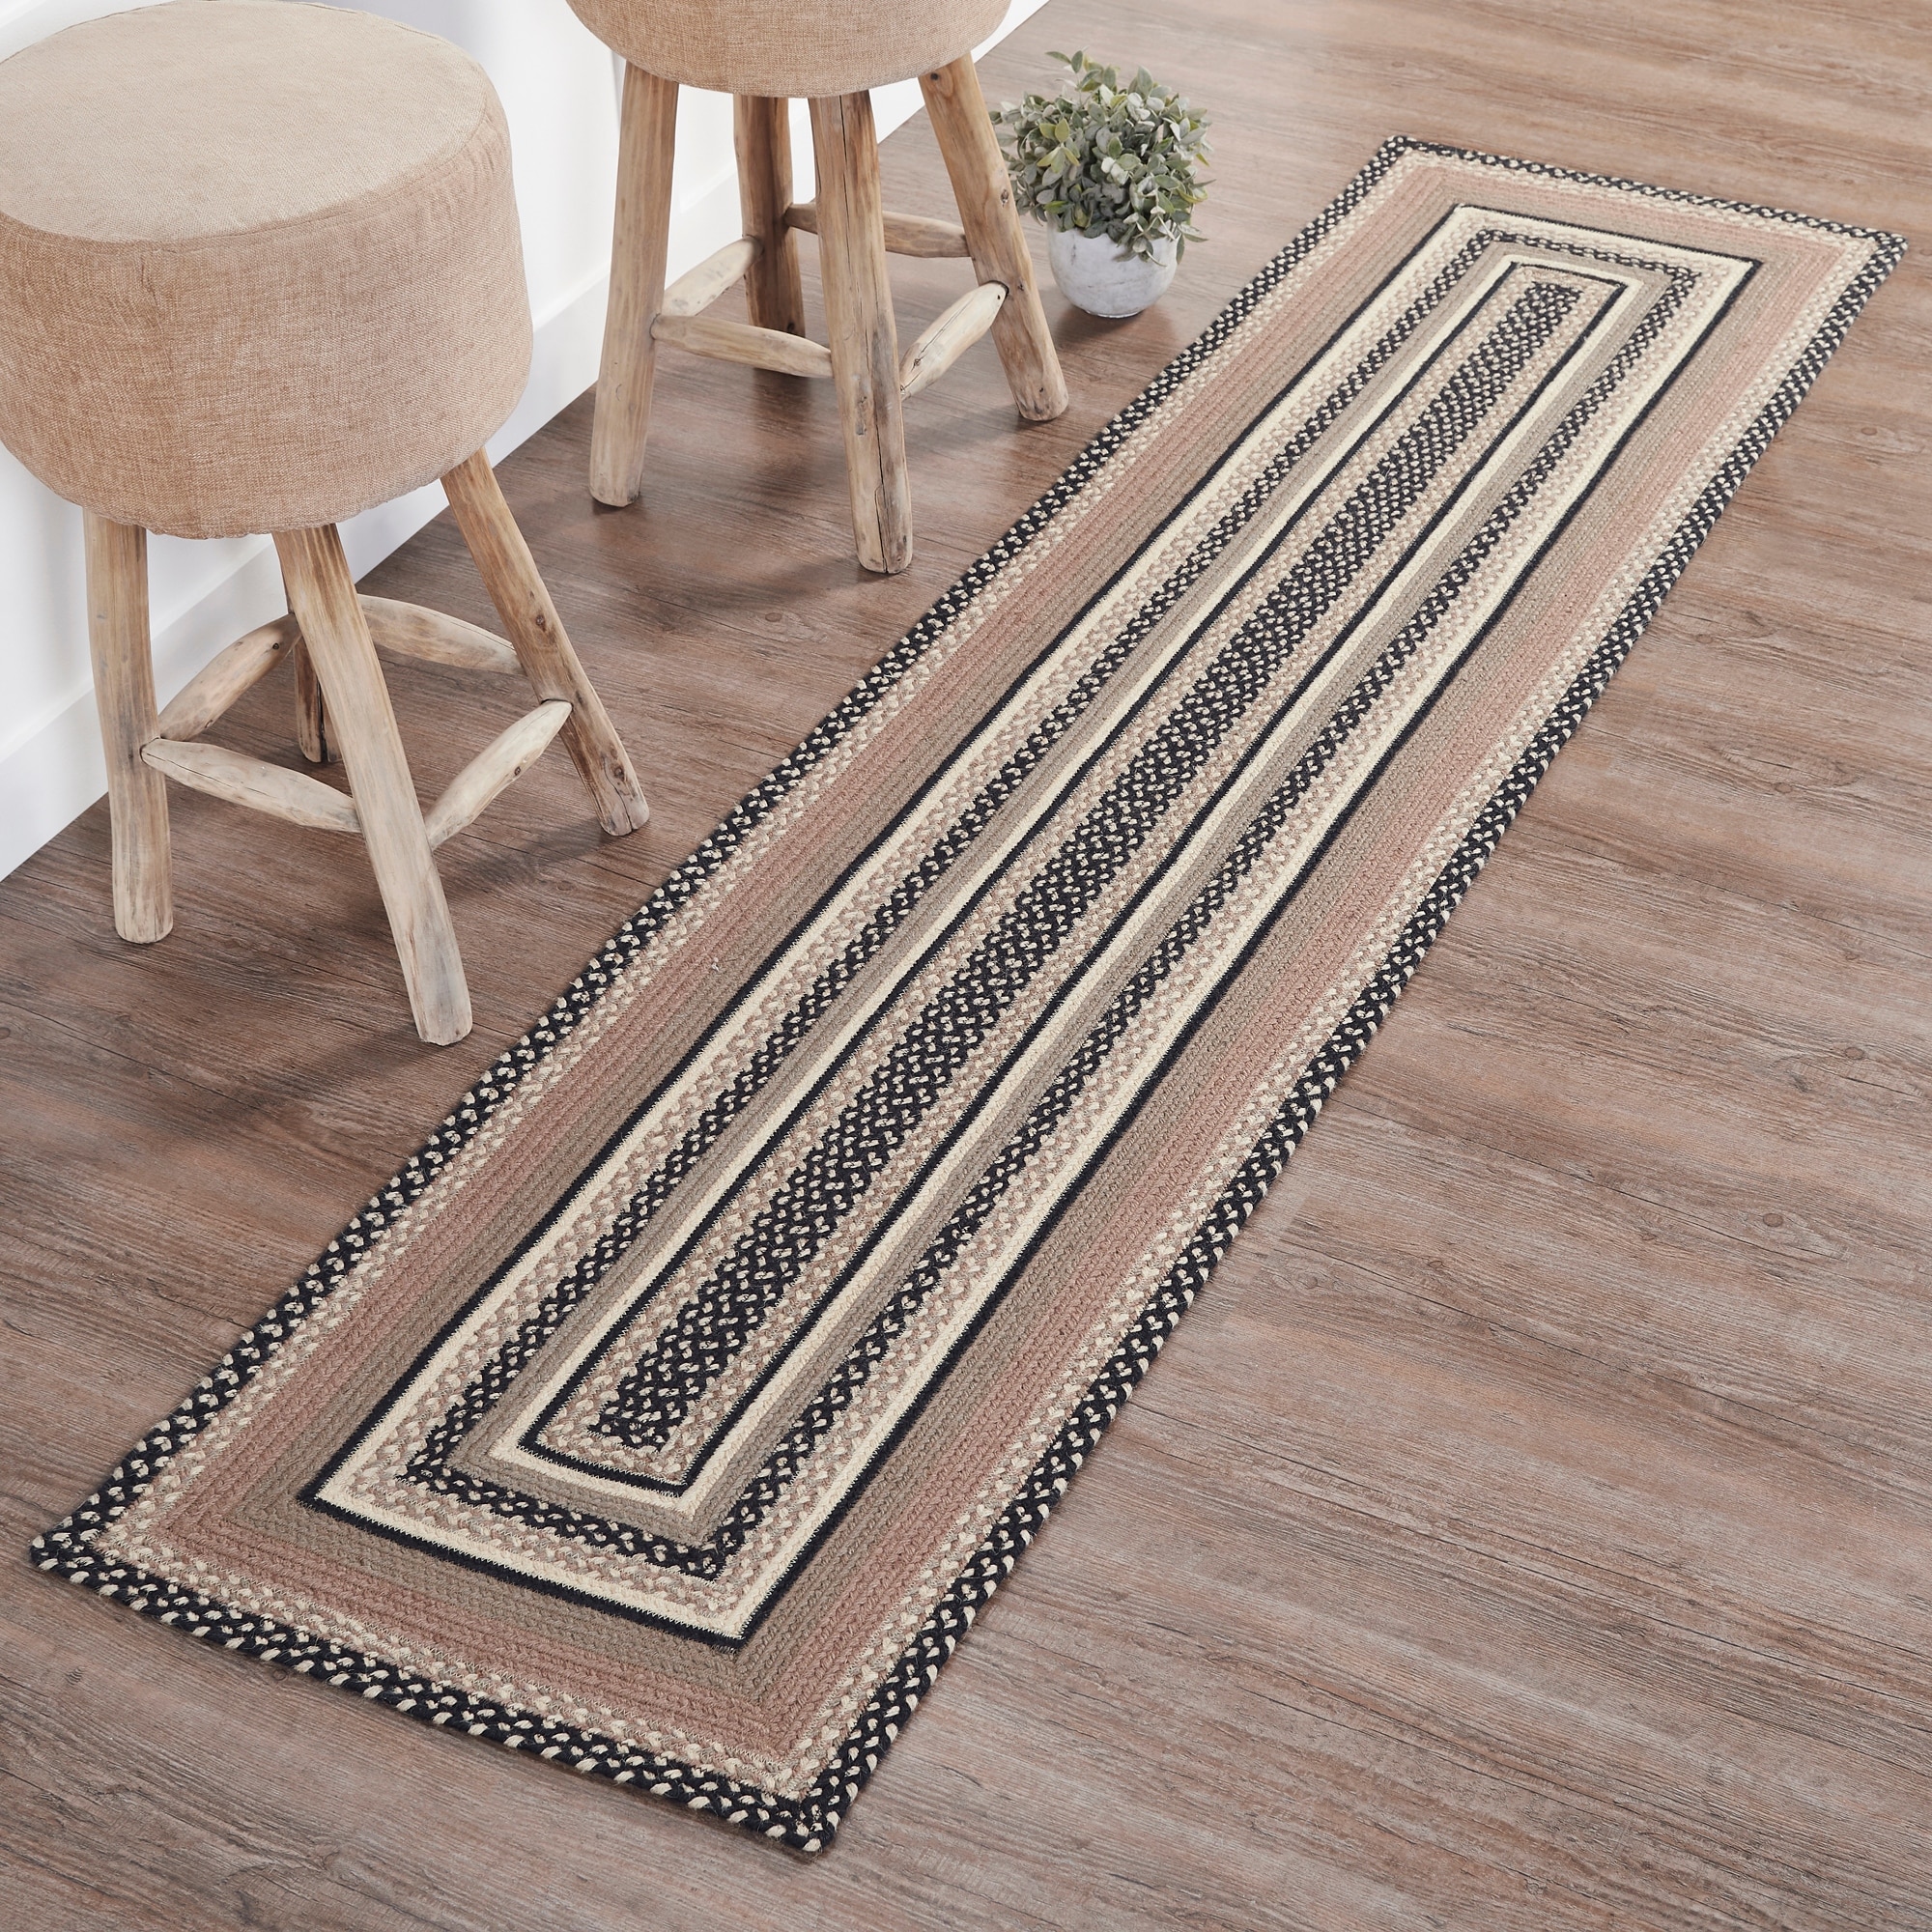 White Braided VHC Brands Area Rugs - Bed Bath & Beyond